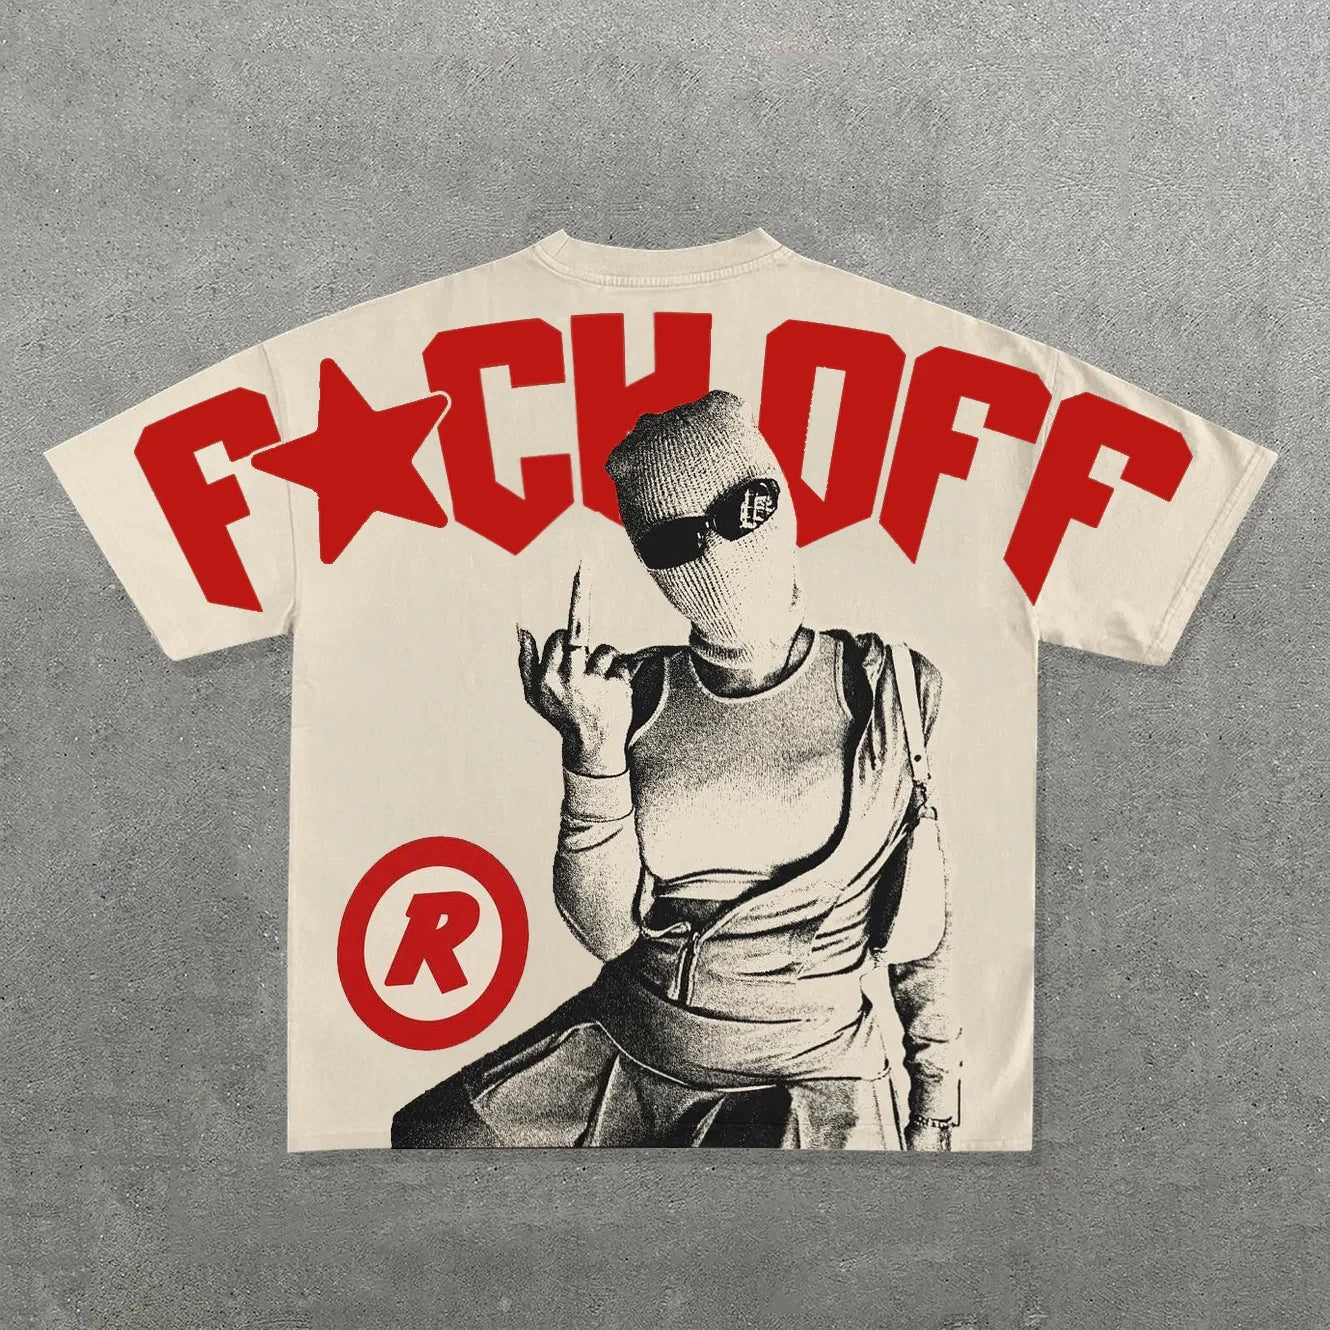 A Maramalive™ Punk Hip Hop Graphic T Shirts Mens Vintage Y2k Top Goth Oversized T Shirt Fashion Loose Casual Short Sleeve Streetwear featuring a masked person making an offensive gesture, with the words "F*C*K OFF" in bold red lettering above them and a circled "R" logo below.